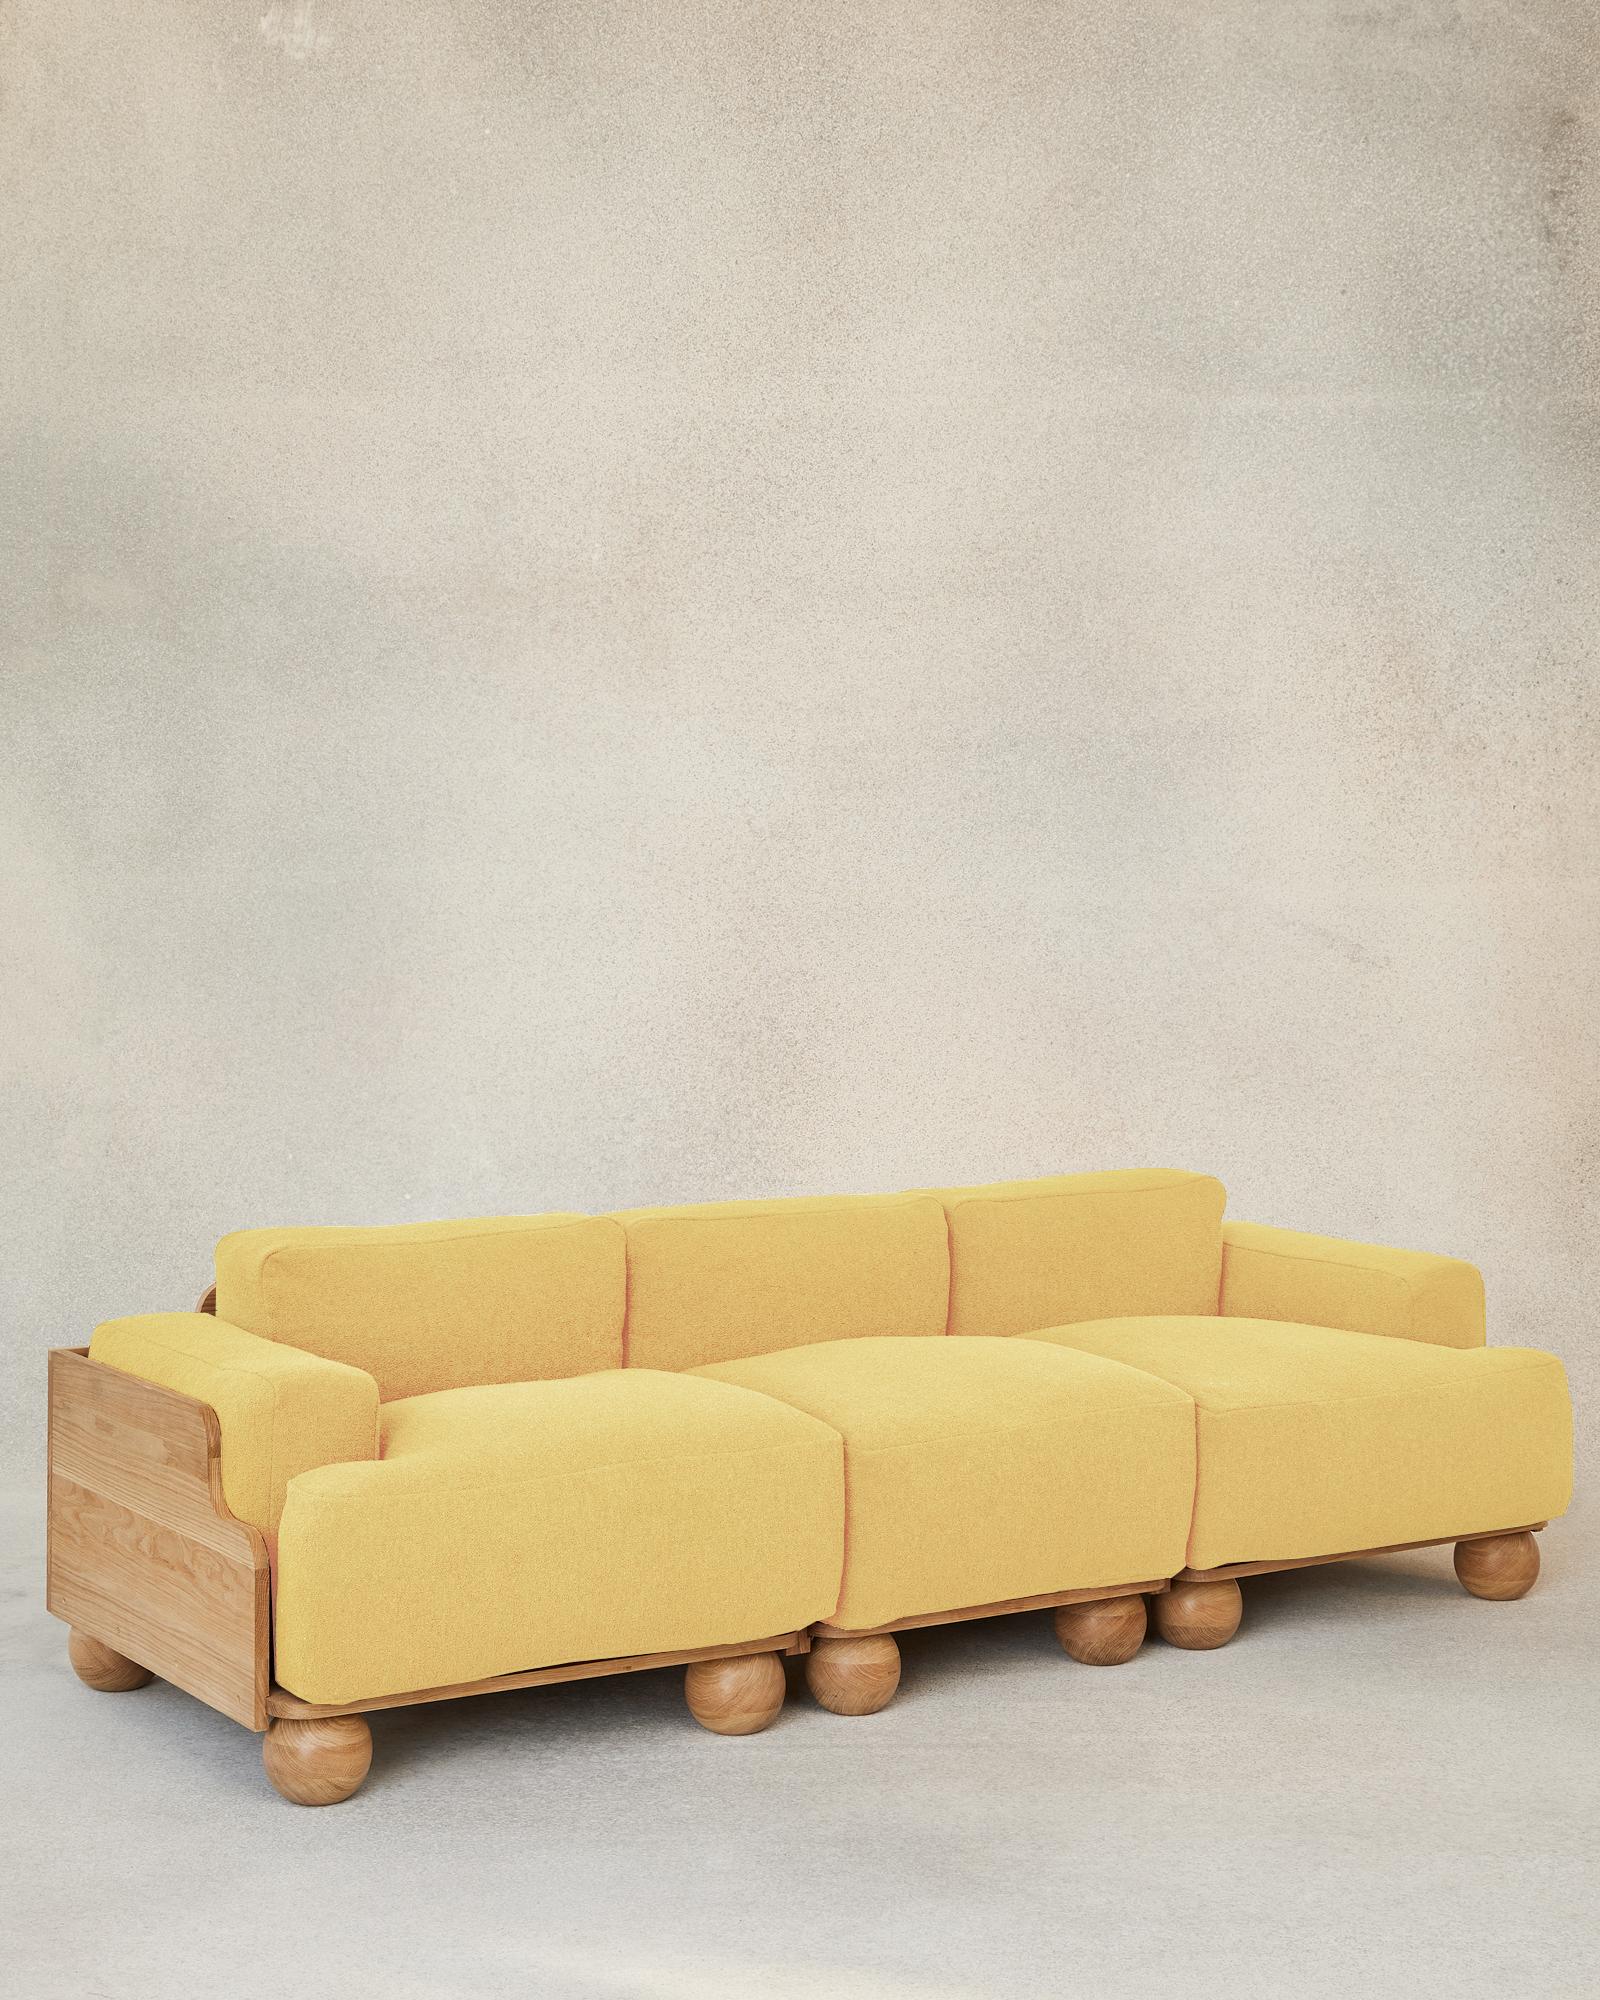 The Cove sofa’s adapts to any interior environment and beckons to be sat in all day. The modular design allows versatile combinations and lengths of two-, three- or more seaters with or without arms. 

Expanses of sculptural solid oak encase the